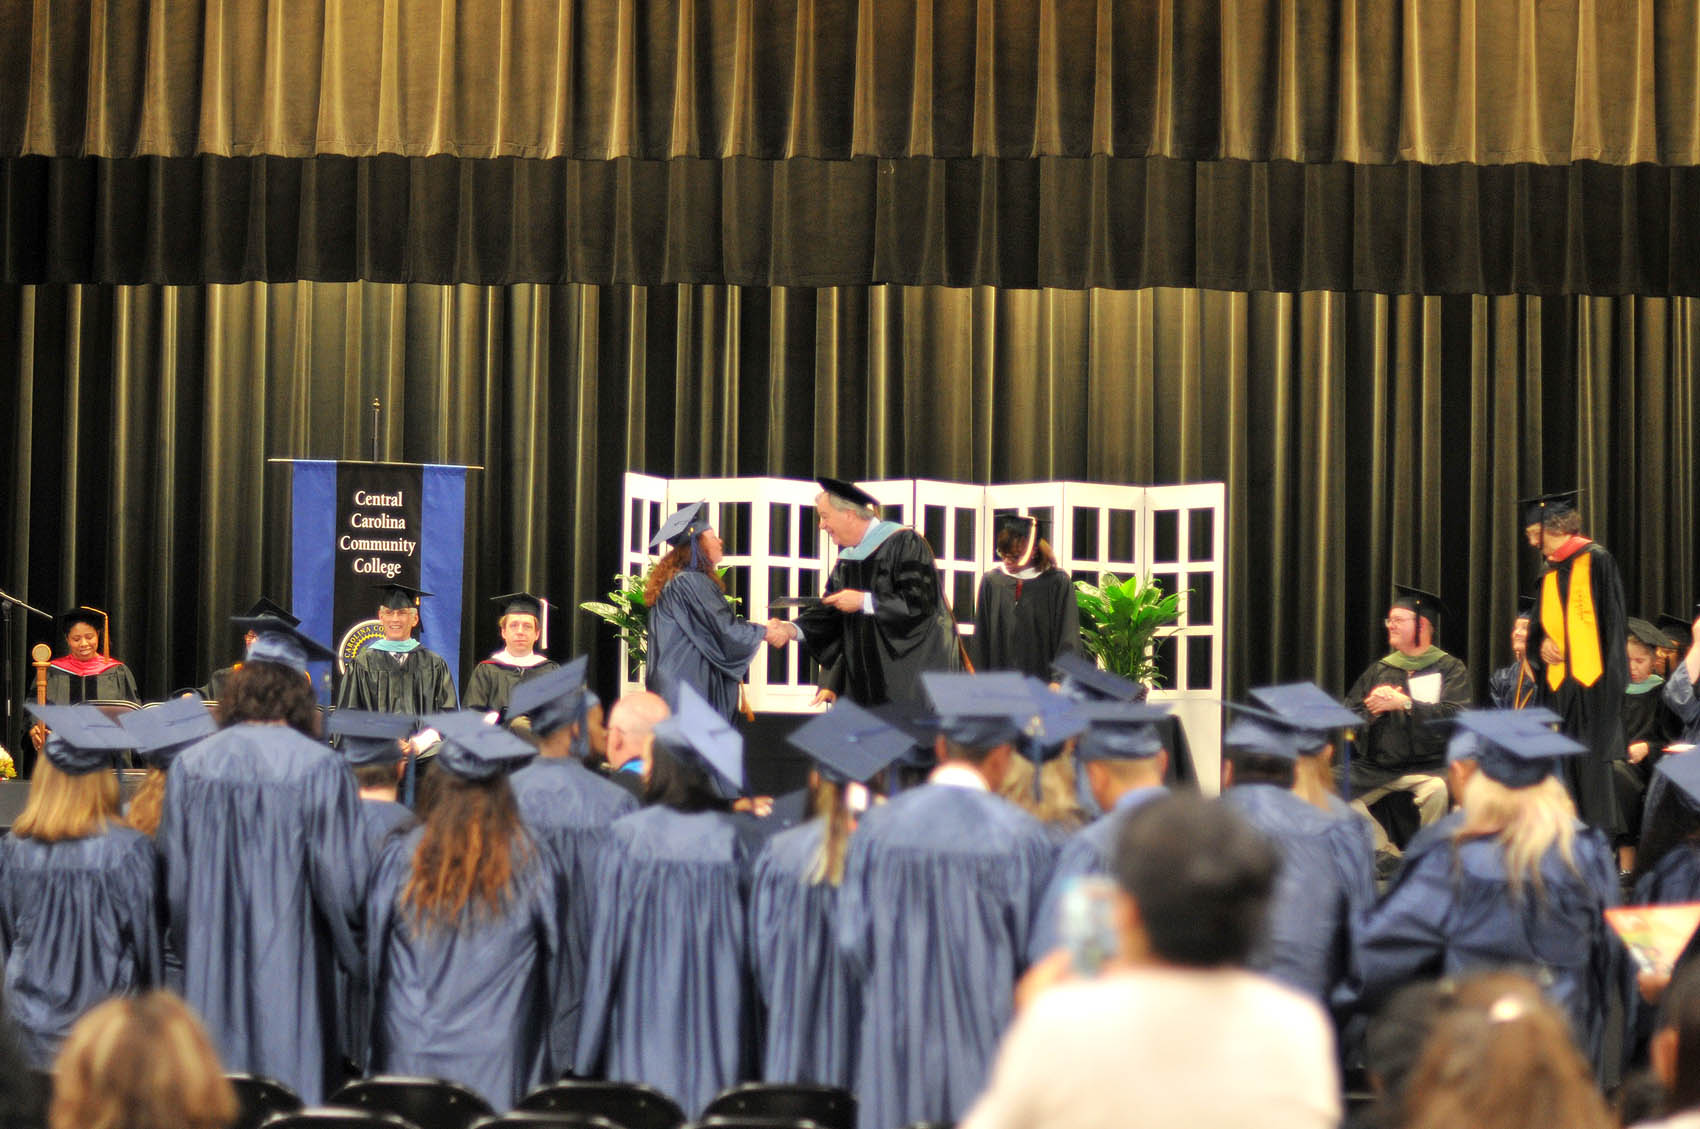 College and Career Readiness graduation held at Central Carolina Community College